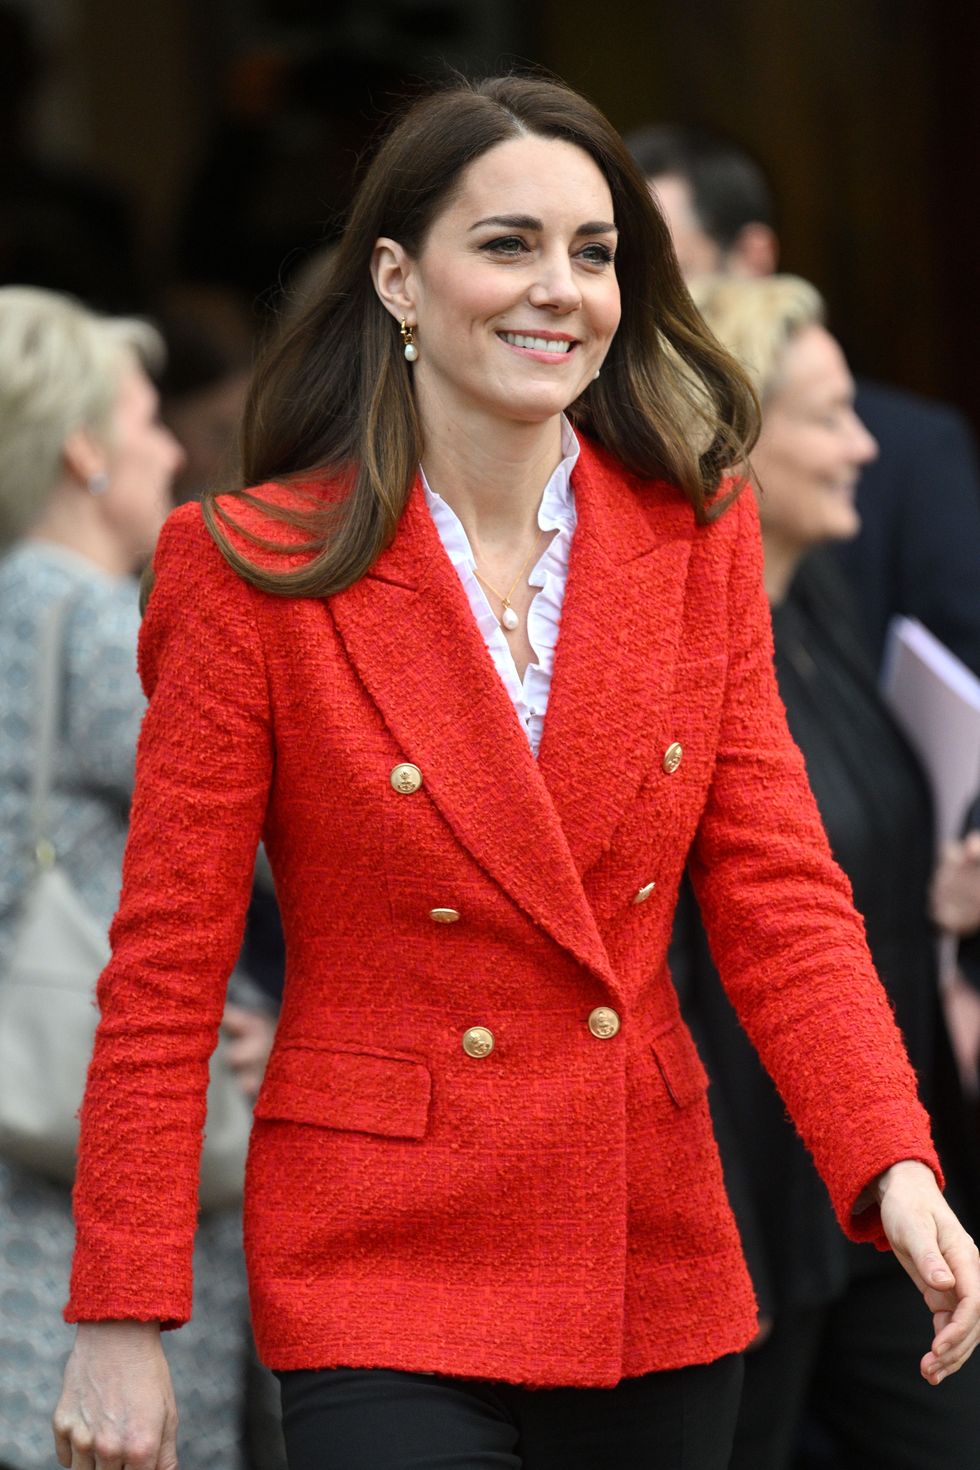 copenhagen, denmark   february 22 catherine, duchess of cambridge departs after a visit of the copenhagen infant mental health project at the university of copenhagen on february 22, 2022 in copenhagen, denmark the duchess of cambridge visits copenhagen between 22nd and 23rd february on a working visit with the royal foundation centre for early childhood  photo by samir husseinwireimage